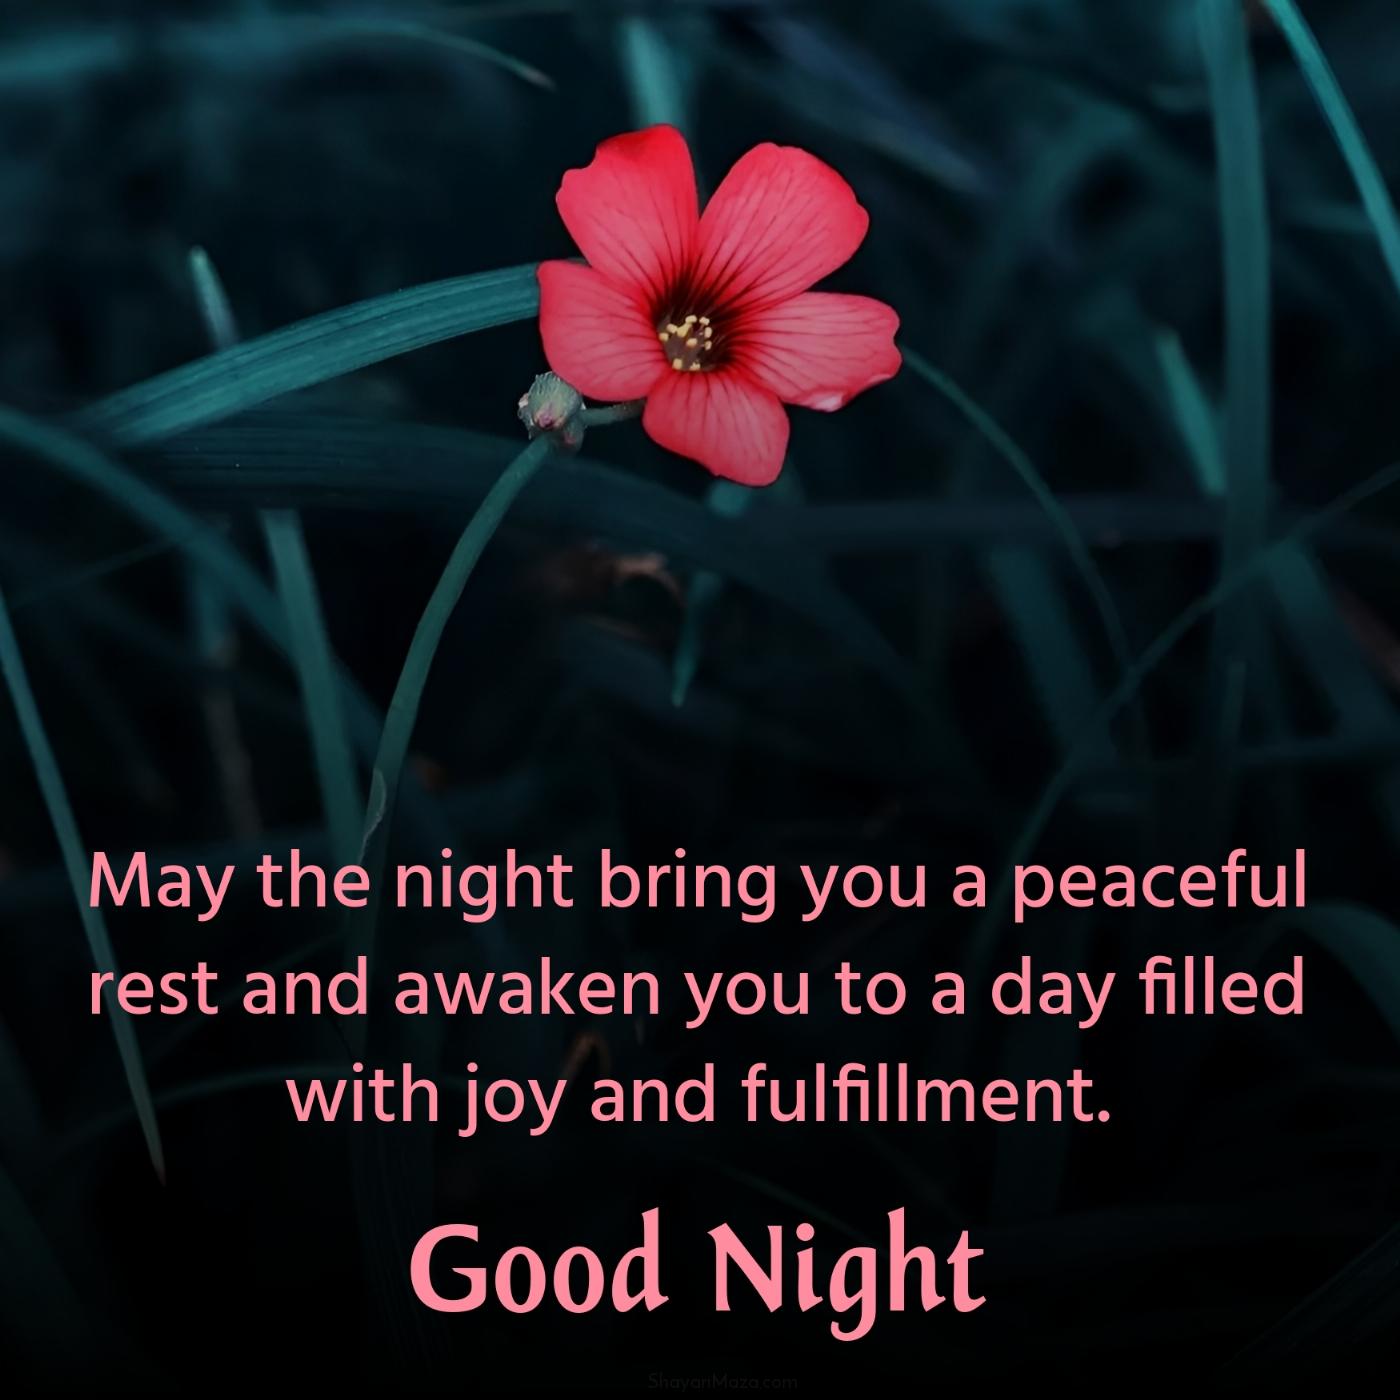 May the night bring you a peaceful rest and awaken you